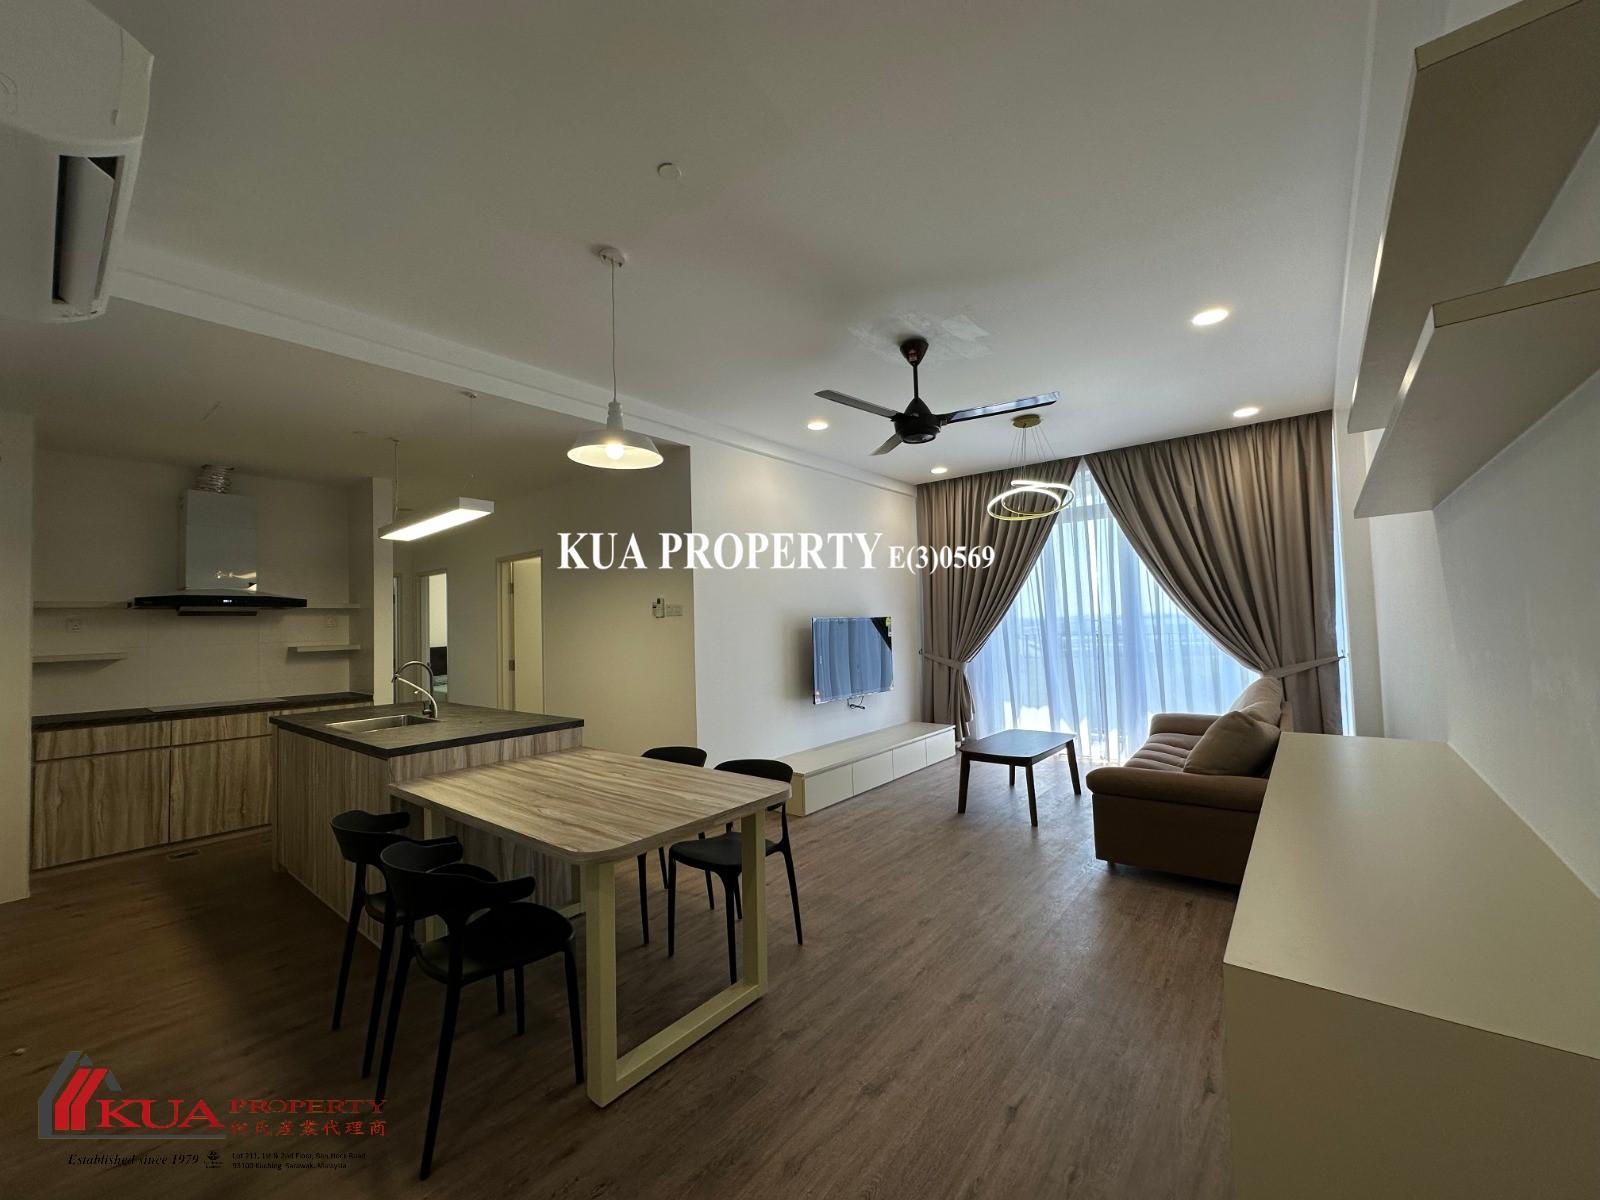 Avona Residence Apartment For Rent! at Tabuan Tranquility